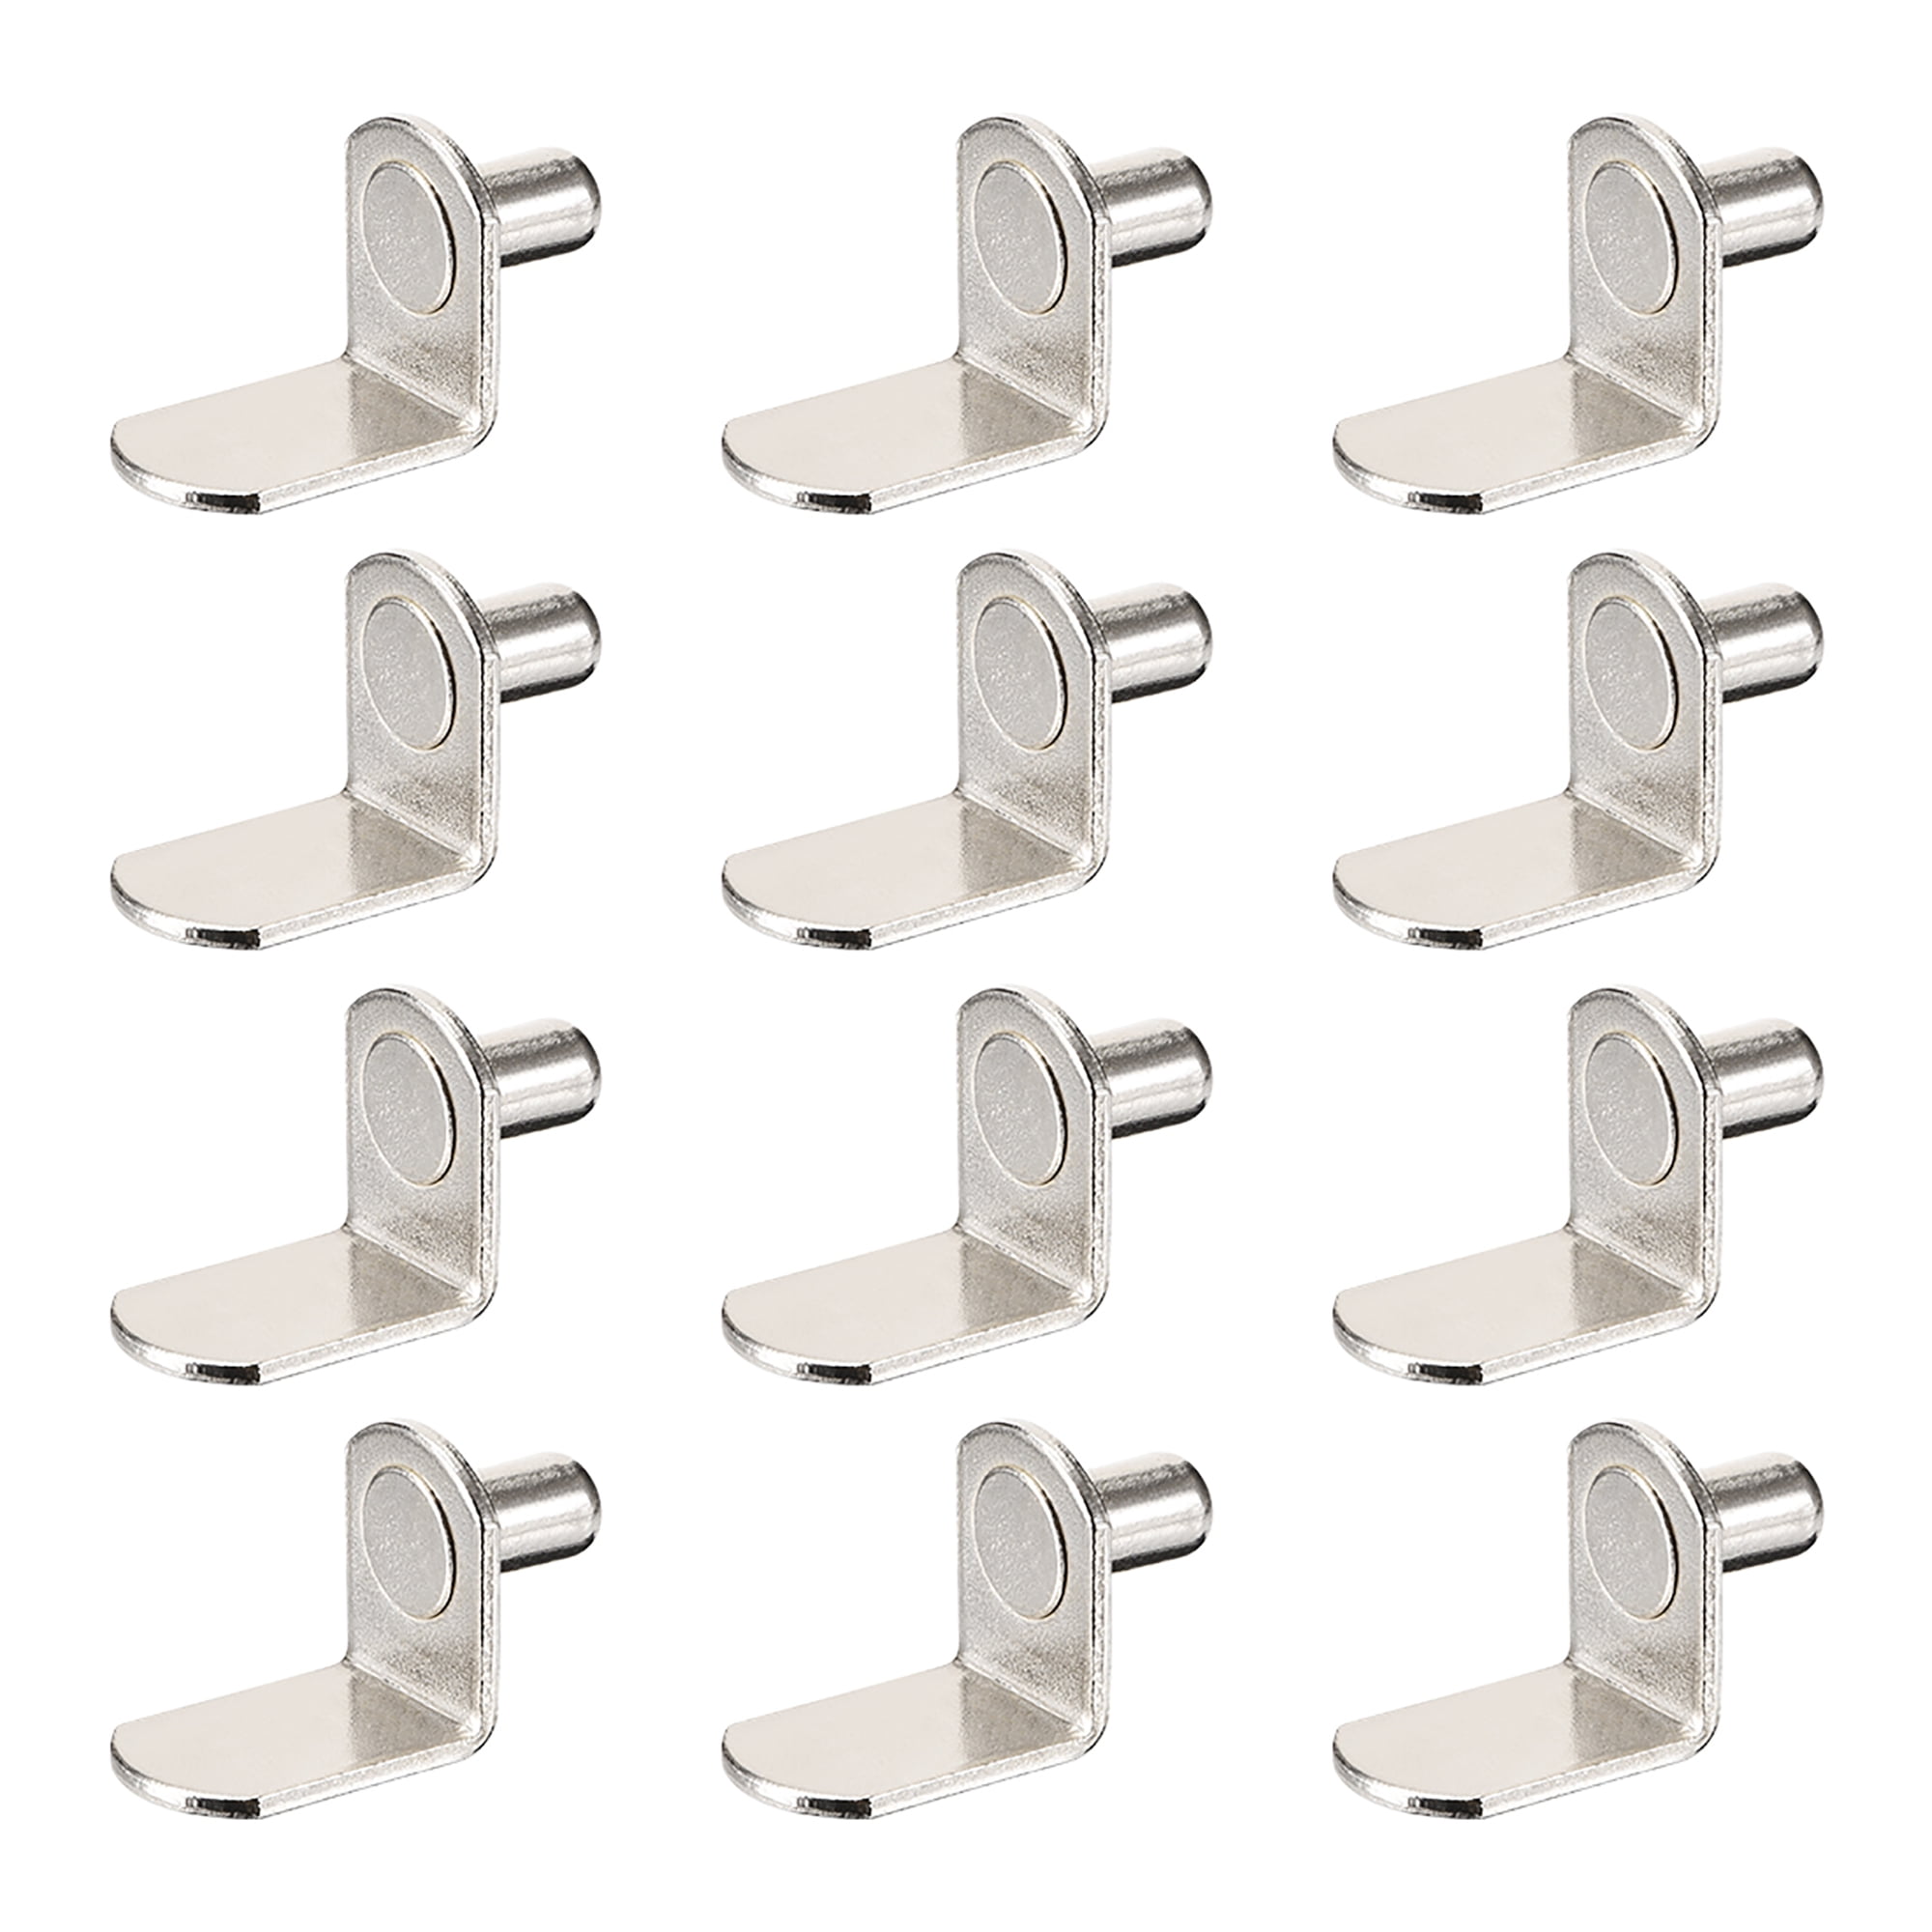 One PAIR Chrome Plated Glass Shelf Clamps Brackets Shelves up to 6mm thick 